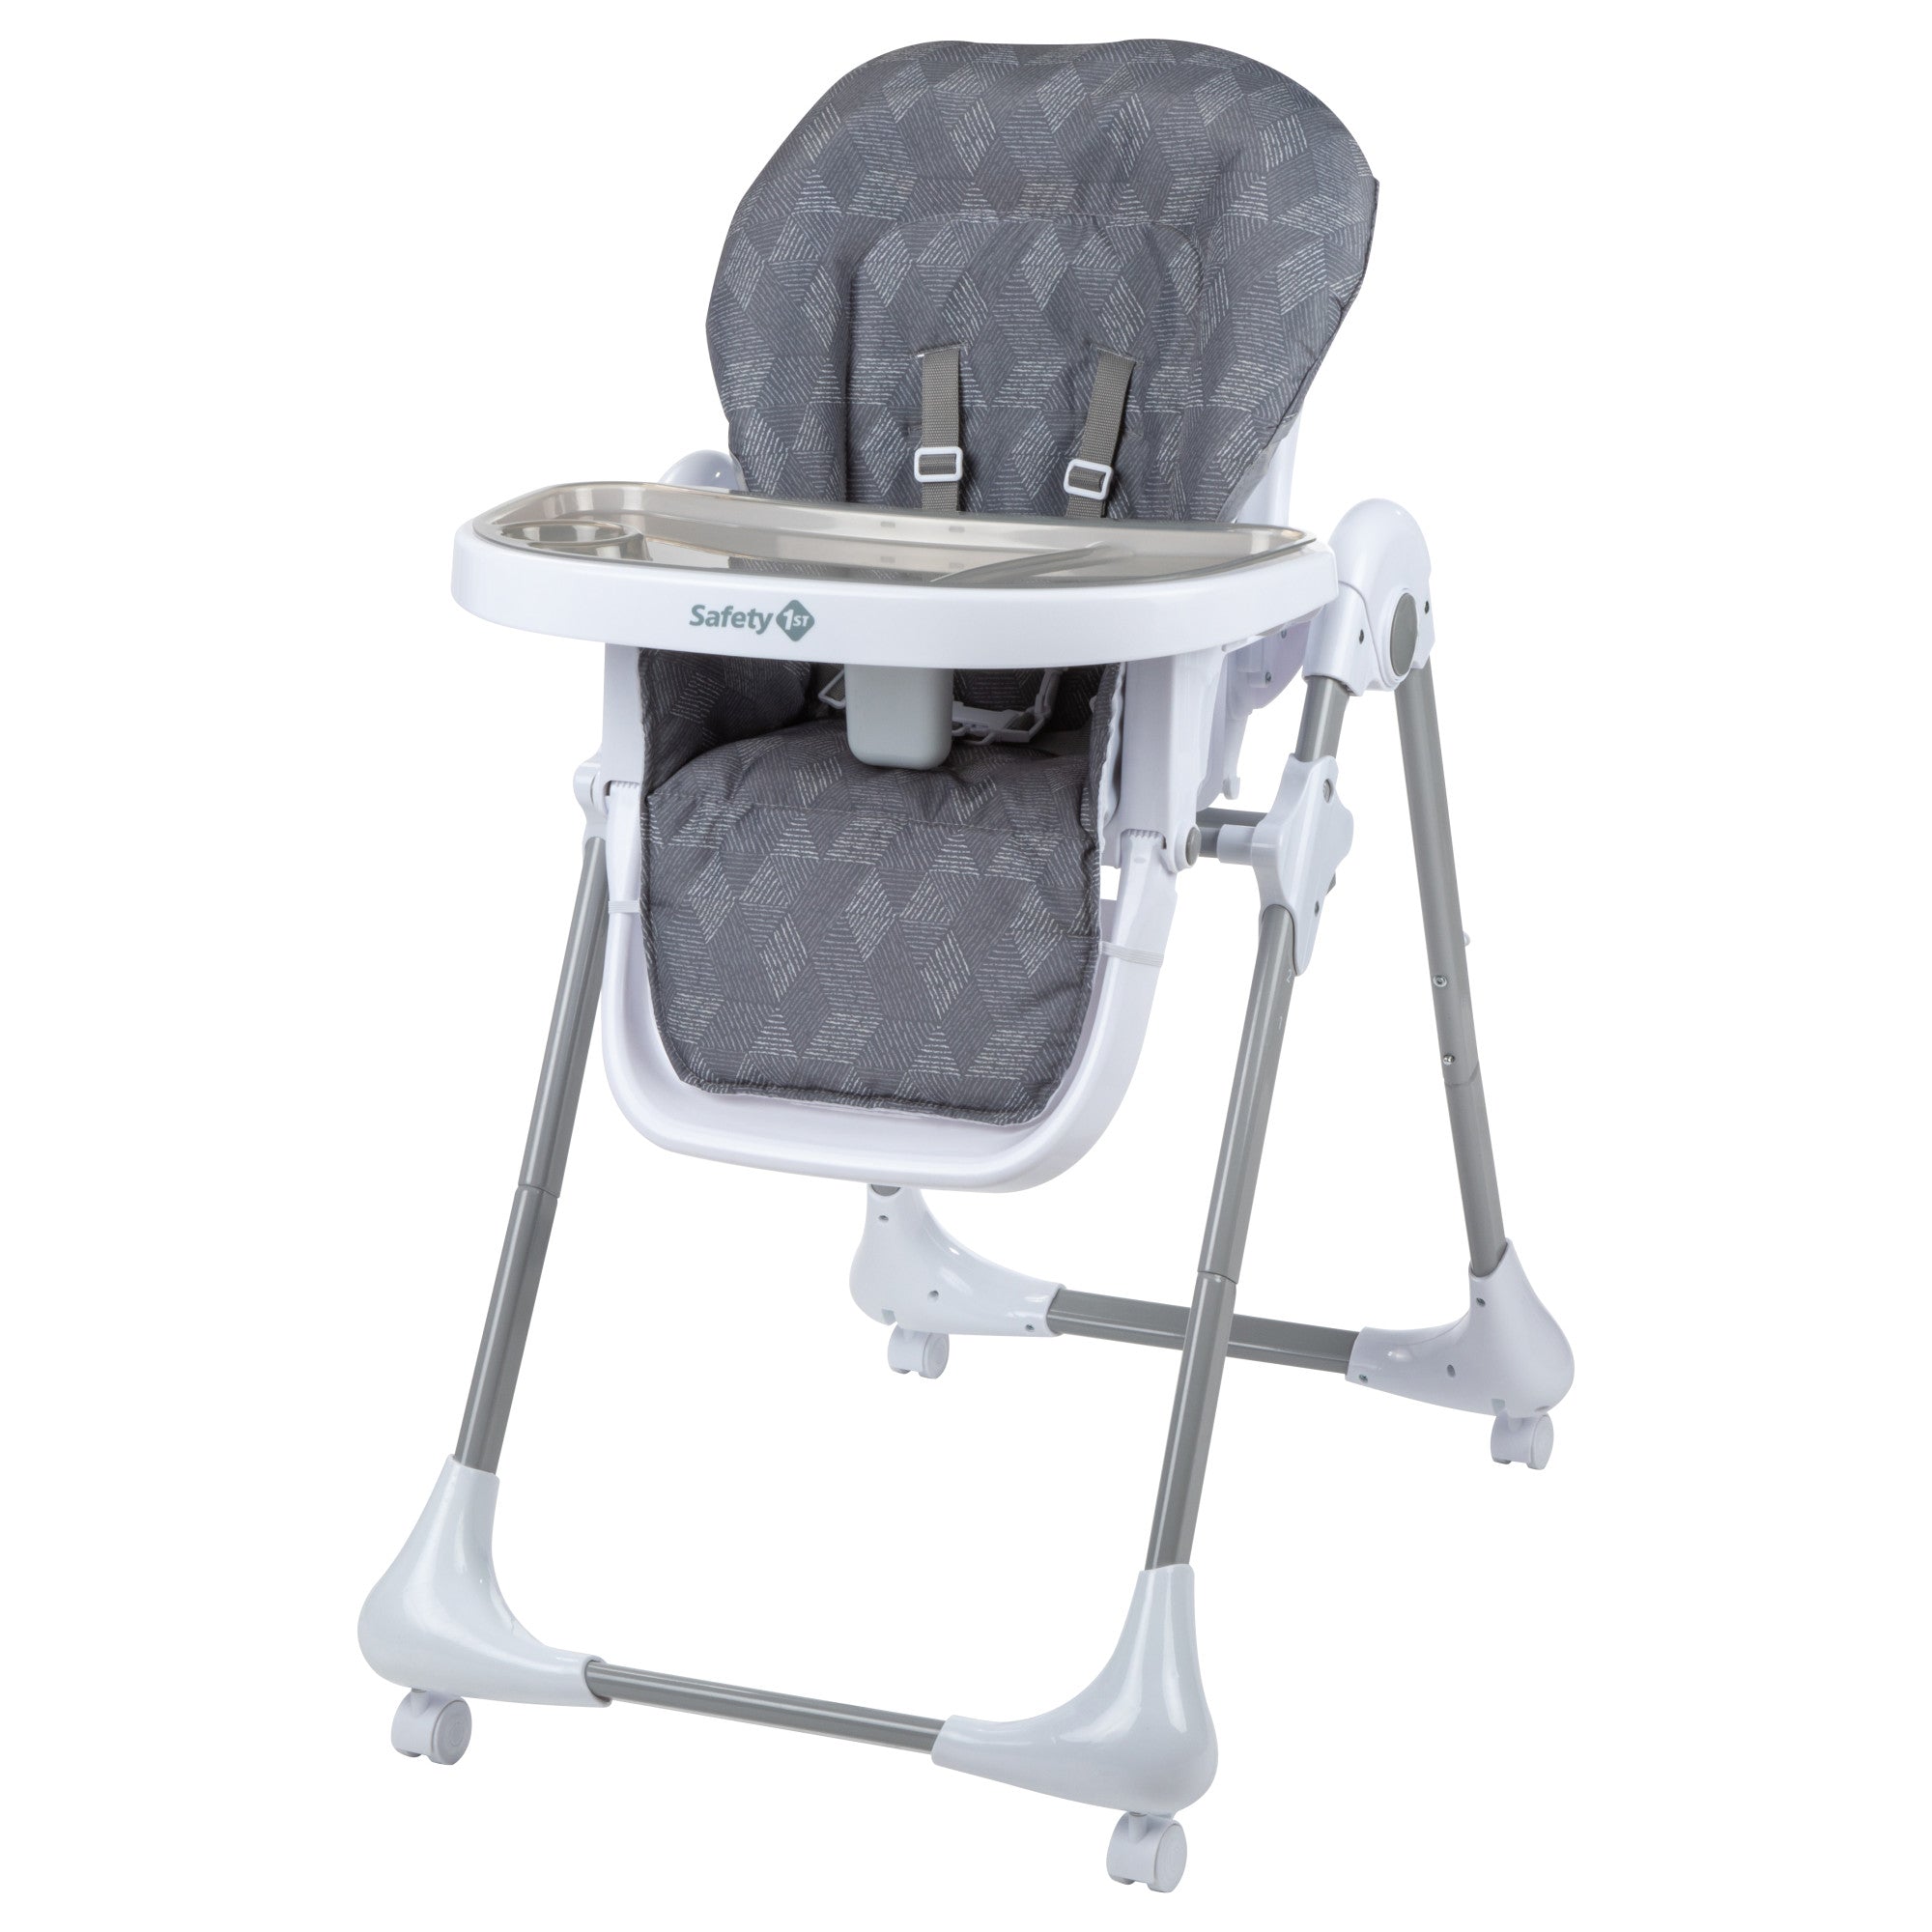 Safety 1st high chair with blue dots fabric pad